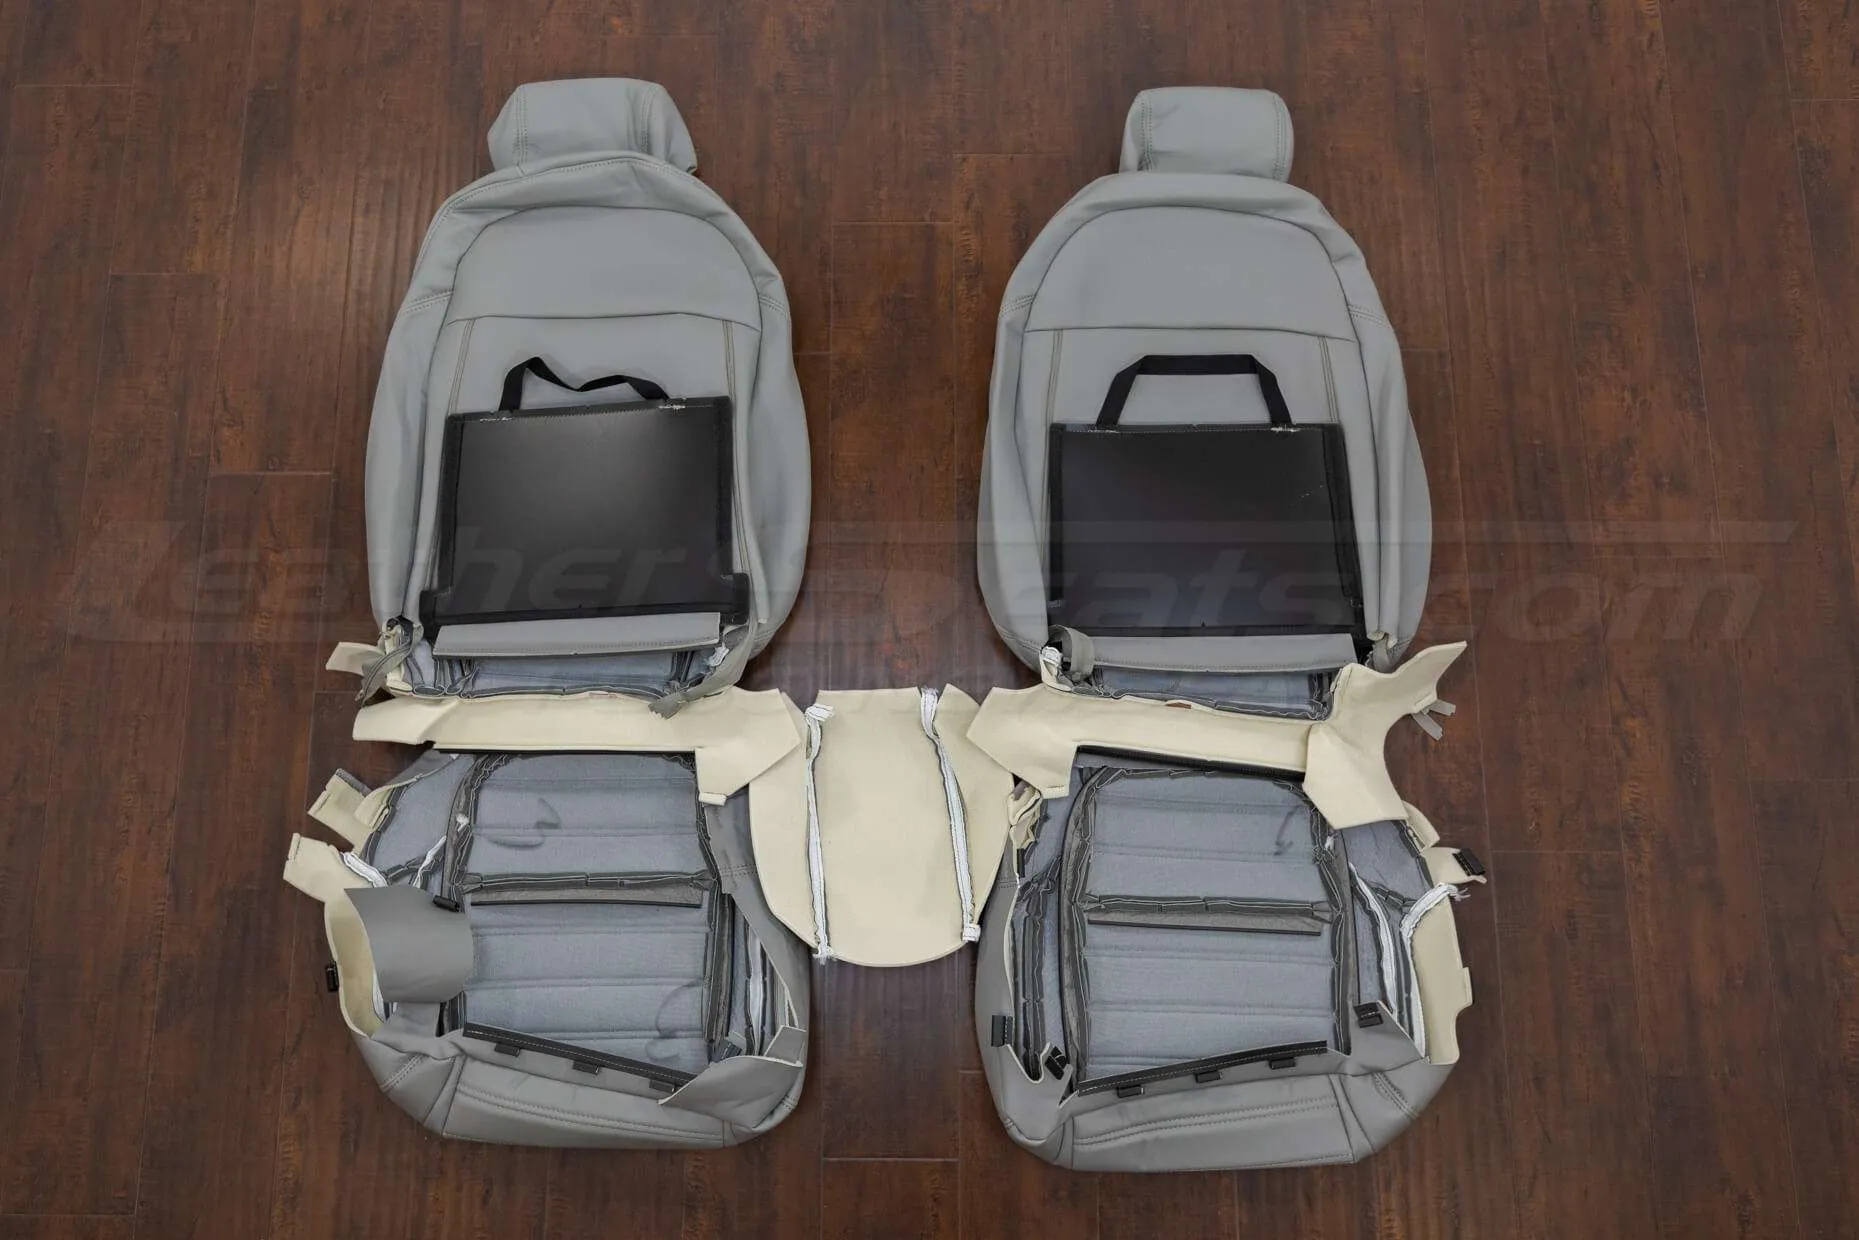 Honda CRV Leather Kit - Ash - Back view of front seats